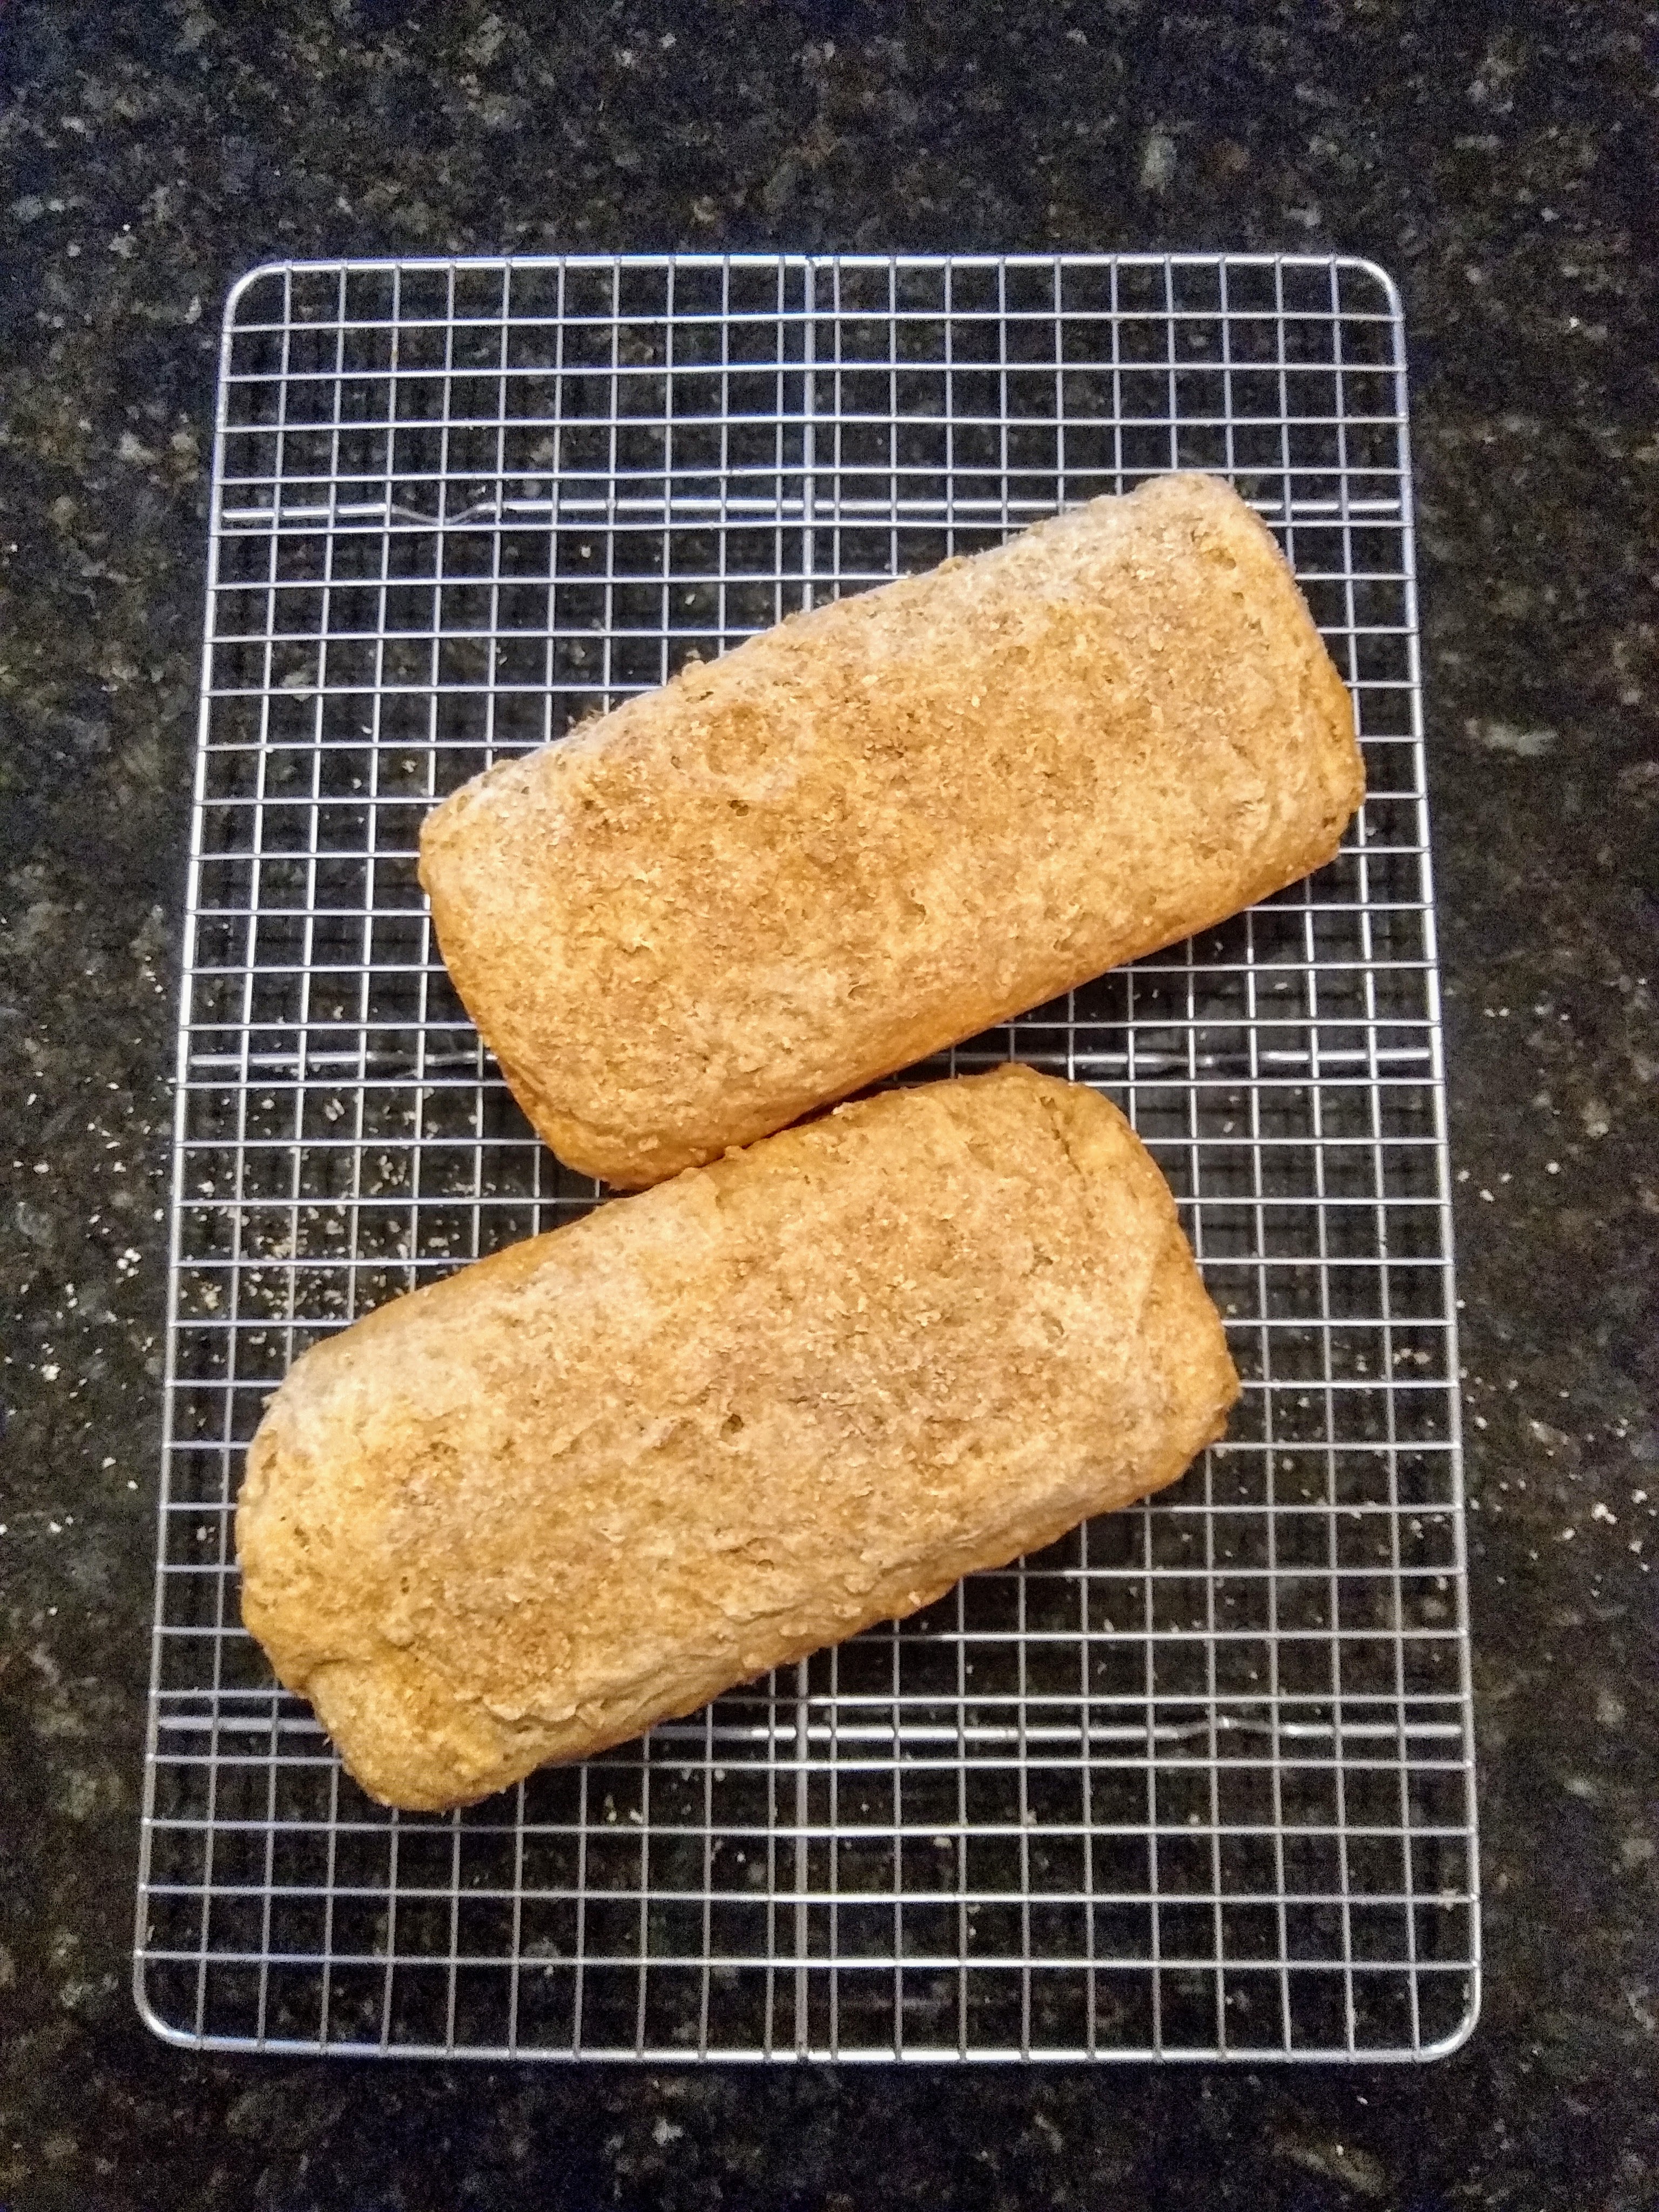 Loaves of sprouted wheat and brown rice bread.